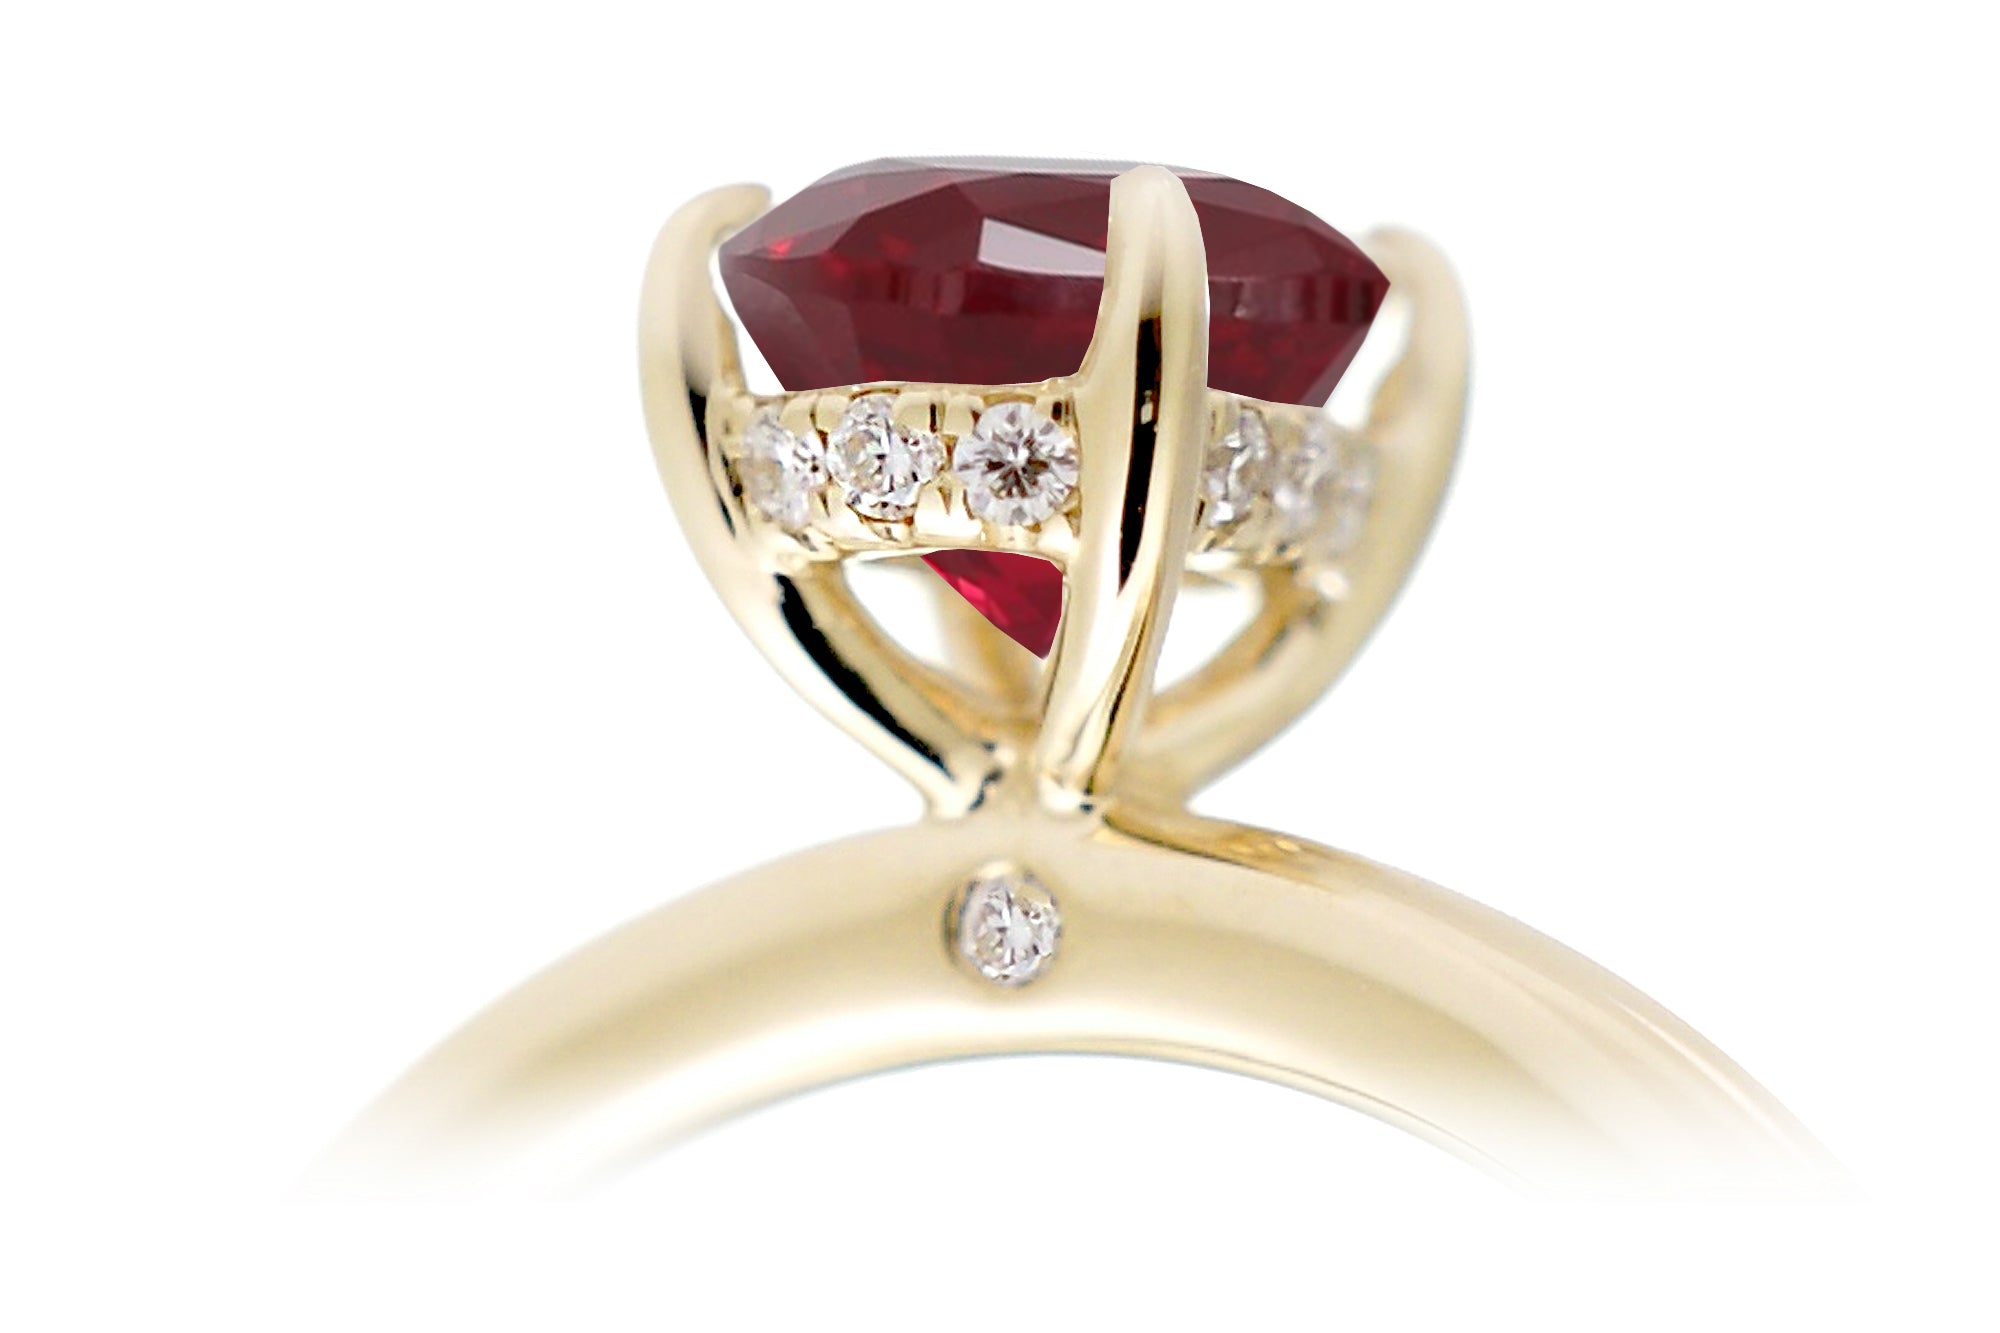 The Lucy Pear Cut Ruby Ring (Lab-Grown)